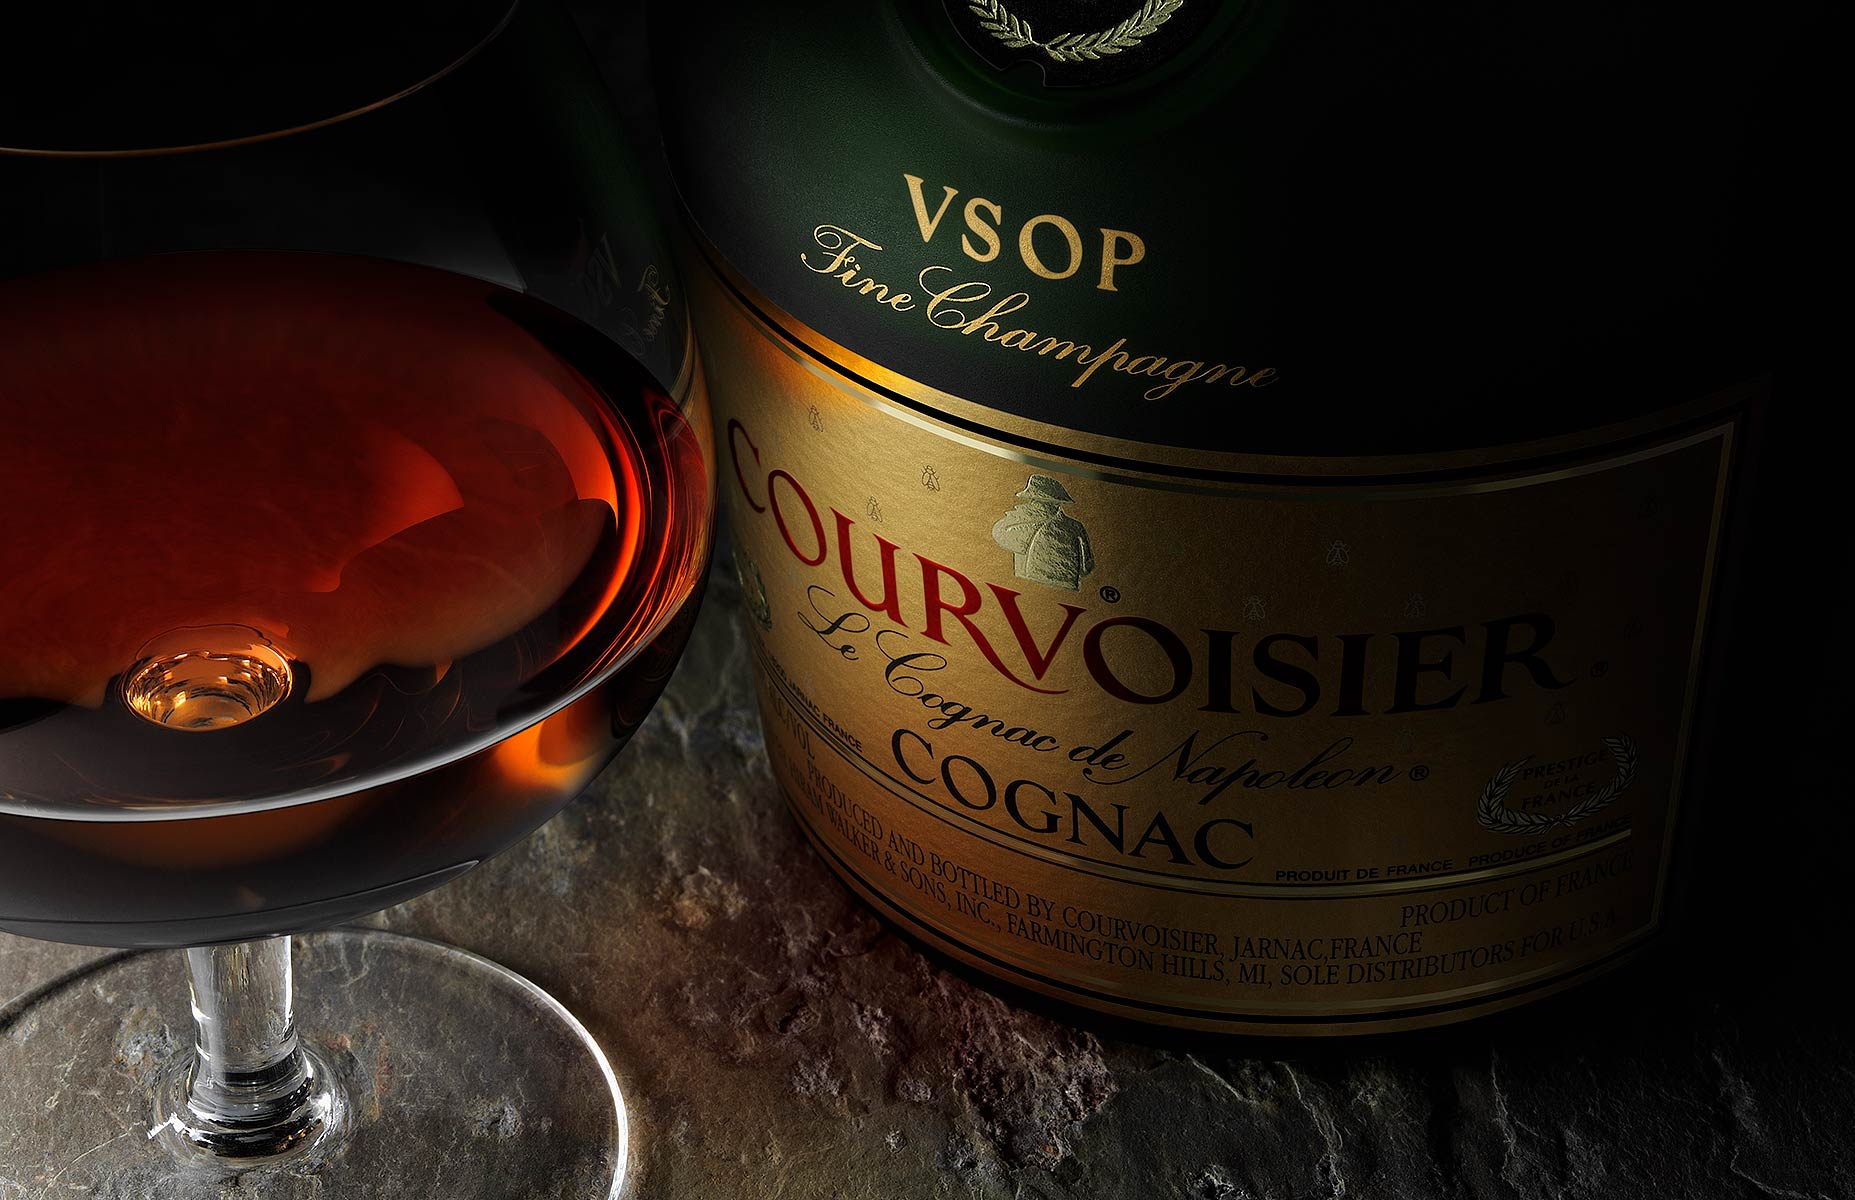 A bottle of VSOP Courvoisier dominates the horizontal frame with a partially filled snifter. The camera angle is at 45º and the subjests sit tightly on a rough hewn stone bar top. The feeling is moody and the soft light originates on the left side highlighting the glasss and label. A reddish glow also illuminates the lower label from light passing through the fluid.